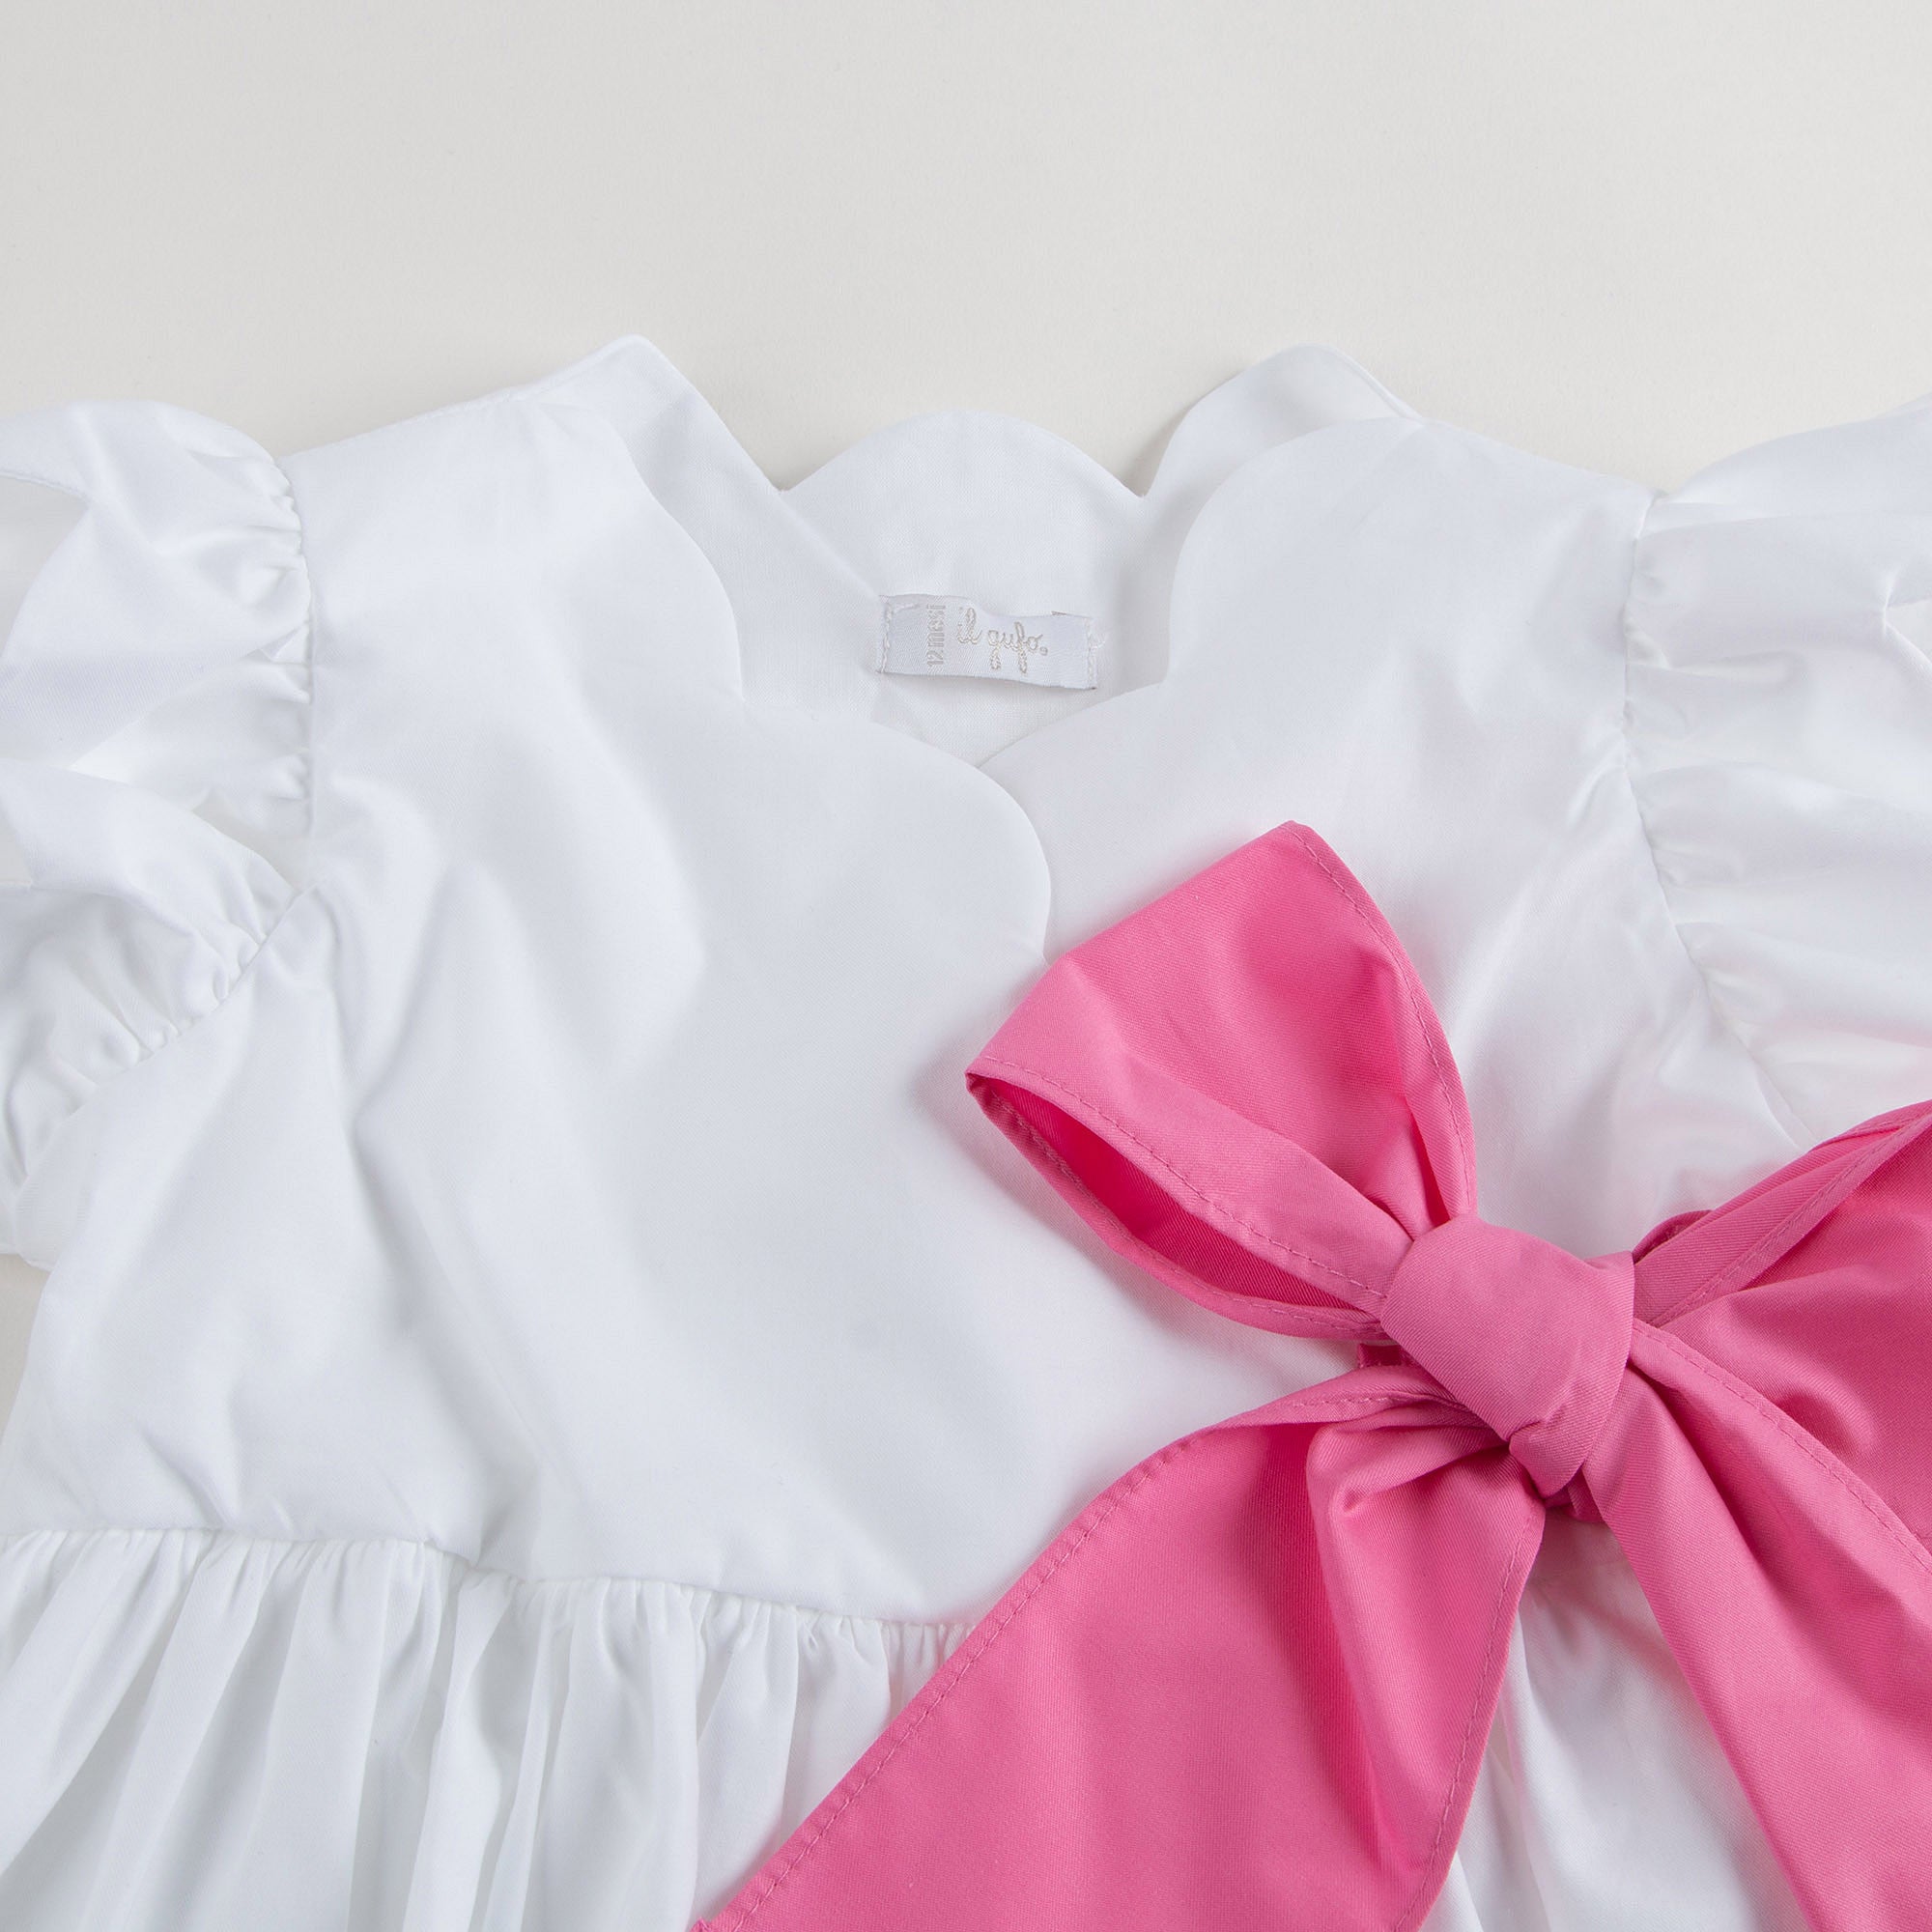 Girls White Cotton Dress with Pink Bow - CÉMAROSE | Children's Fashion Store - 3